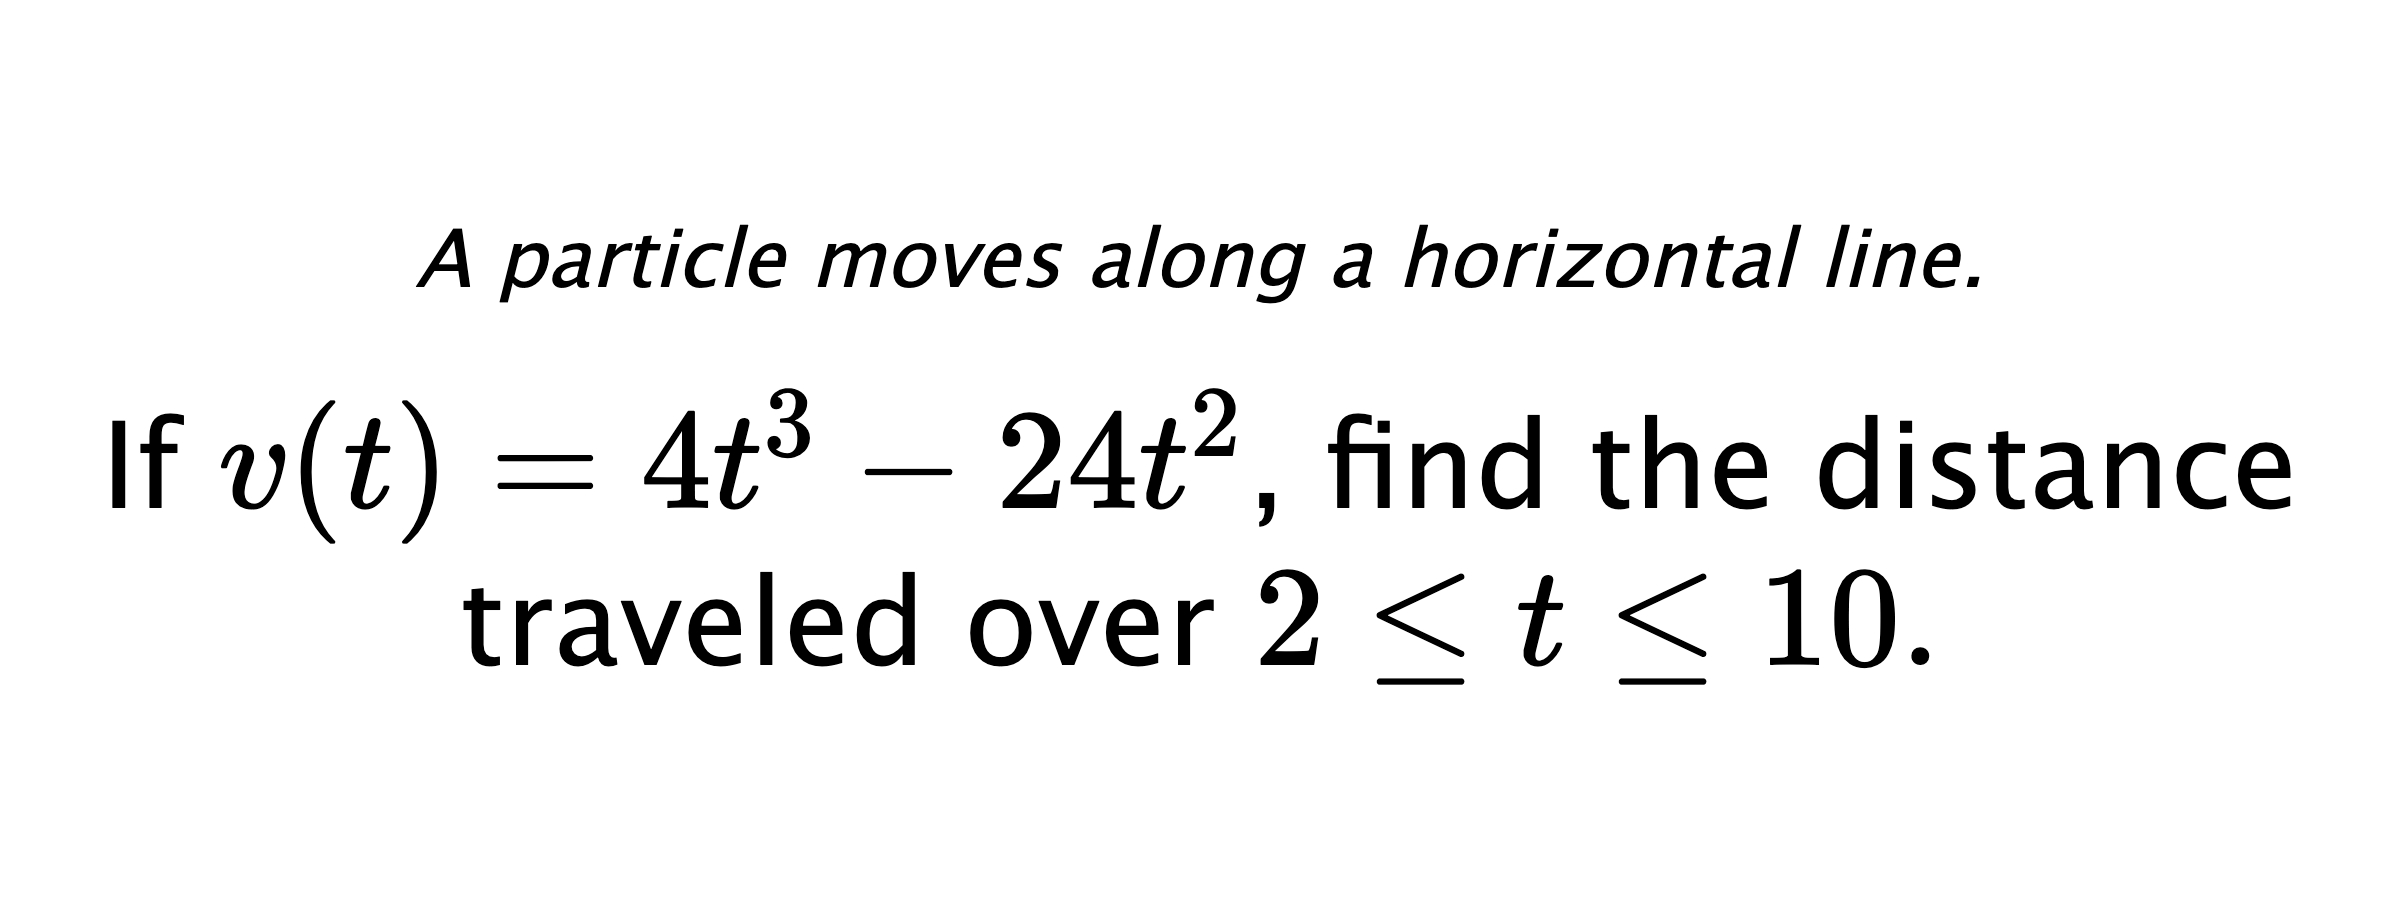 A particle moves along a horizontal line. If $ v(t)=4t^3-24t^2 $, find the distance traveled over $ 2 \leq t \leq 10 .$